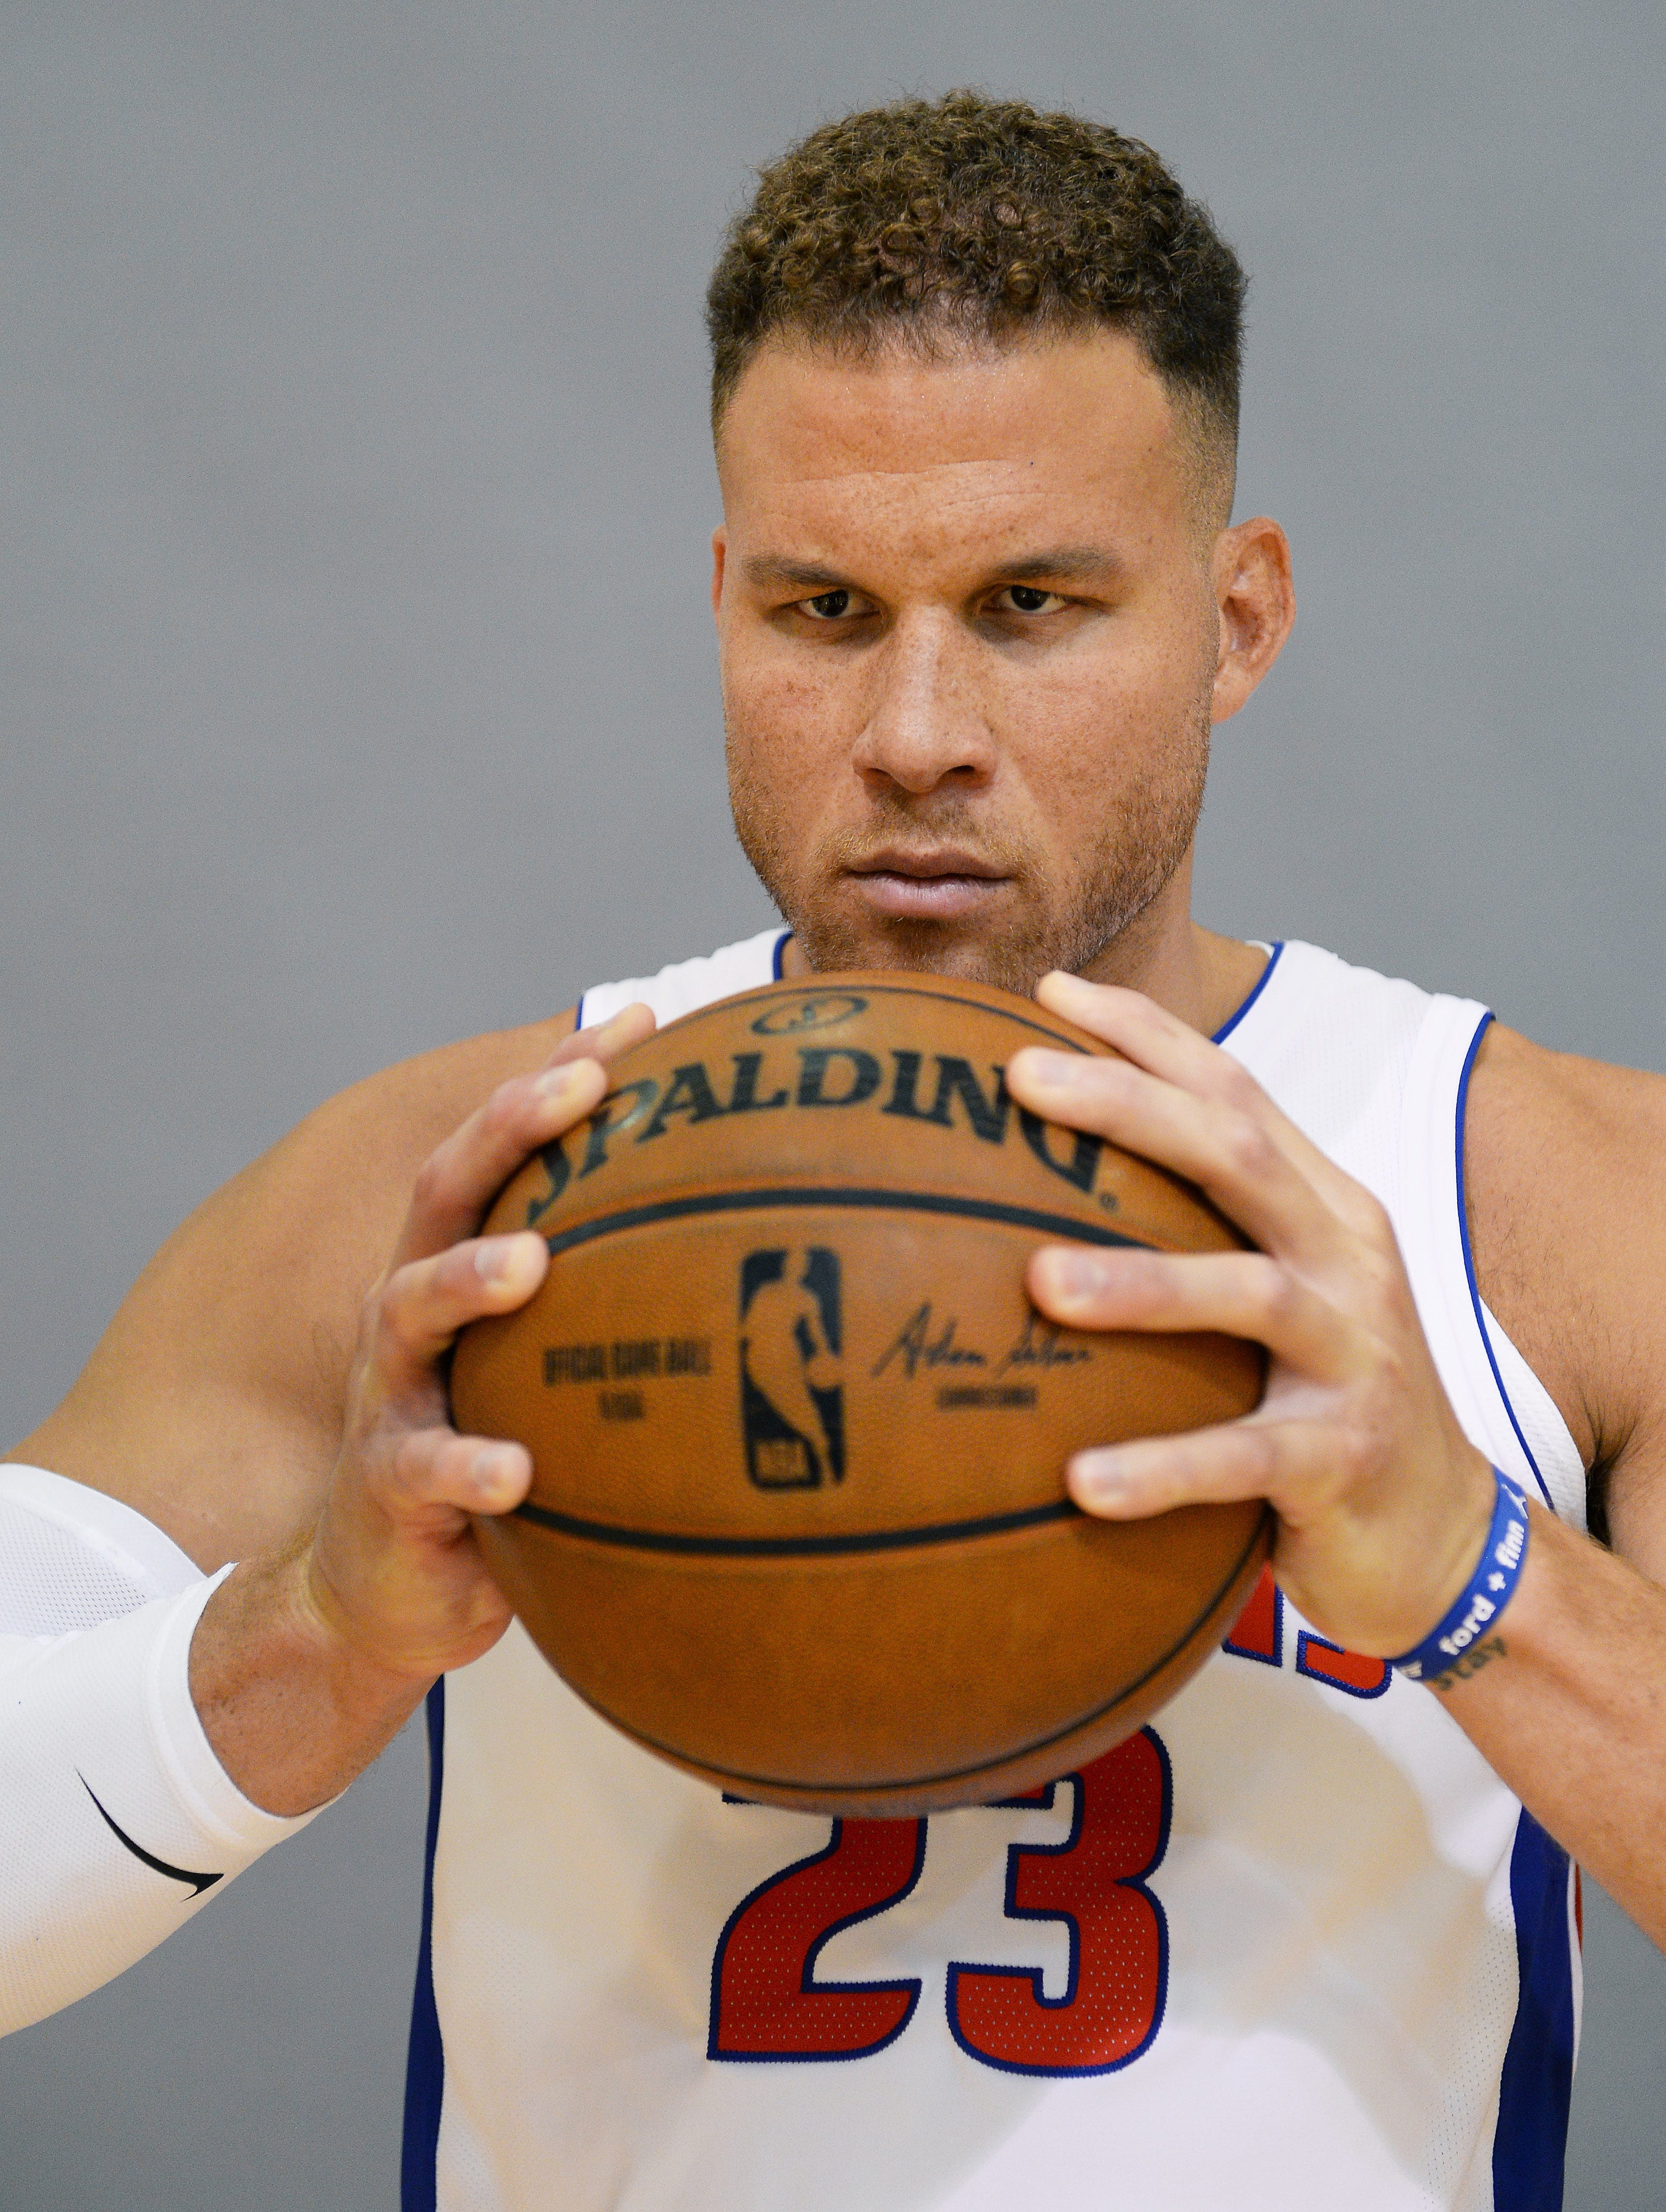 Blake Griffin shows off his serious look during his photo shoot.